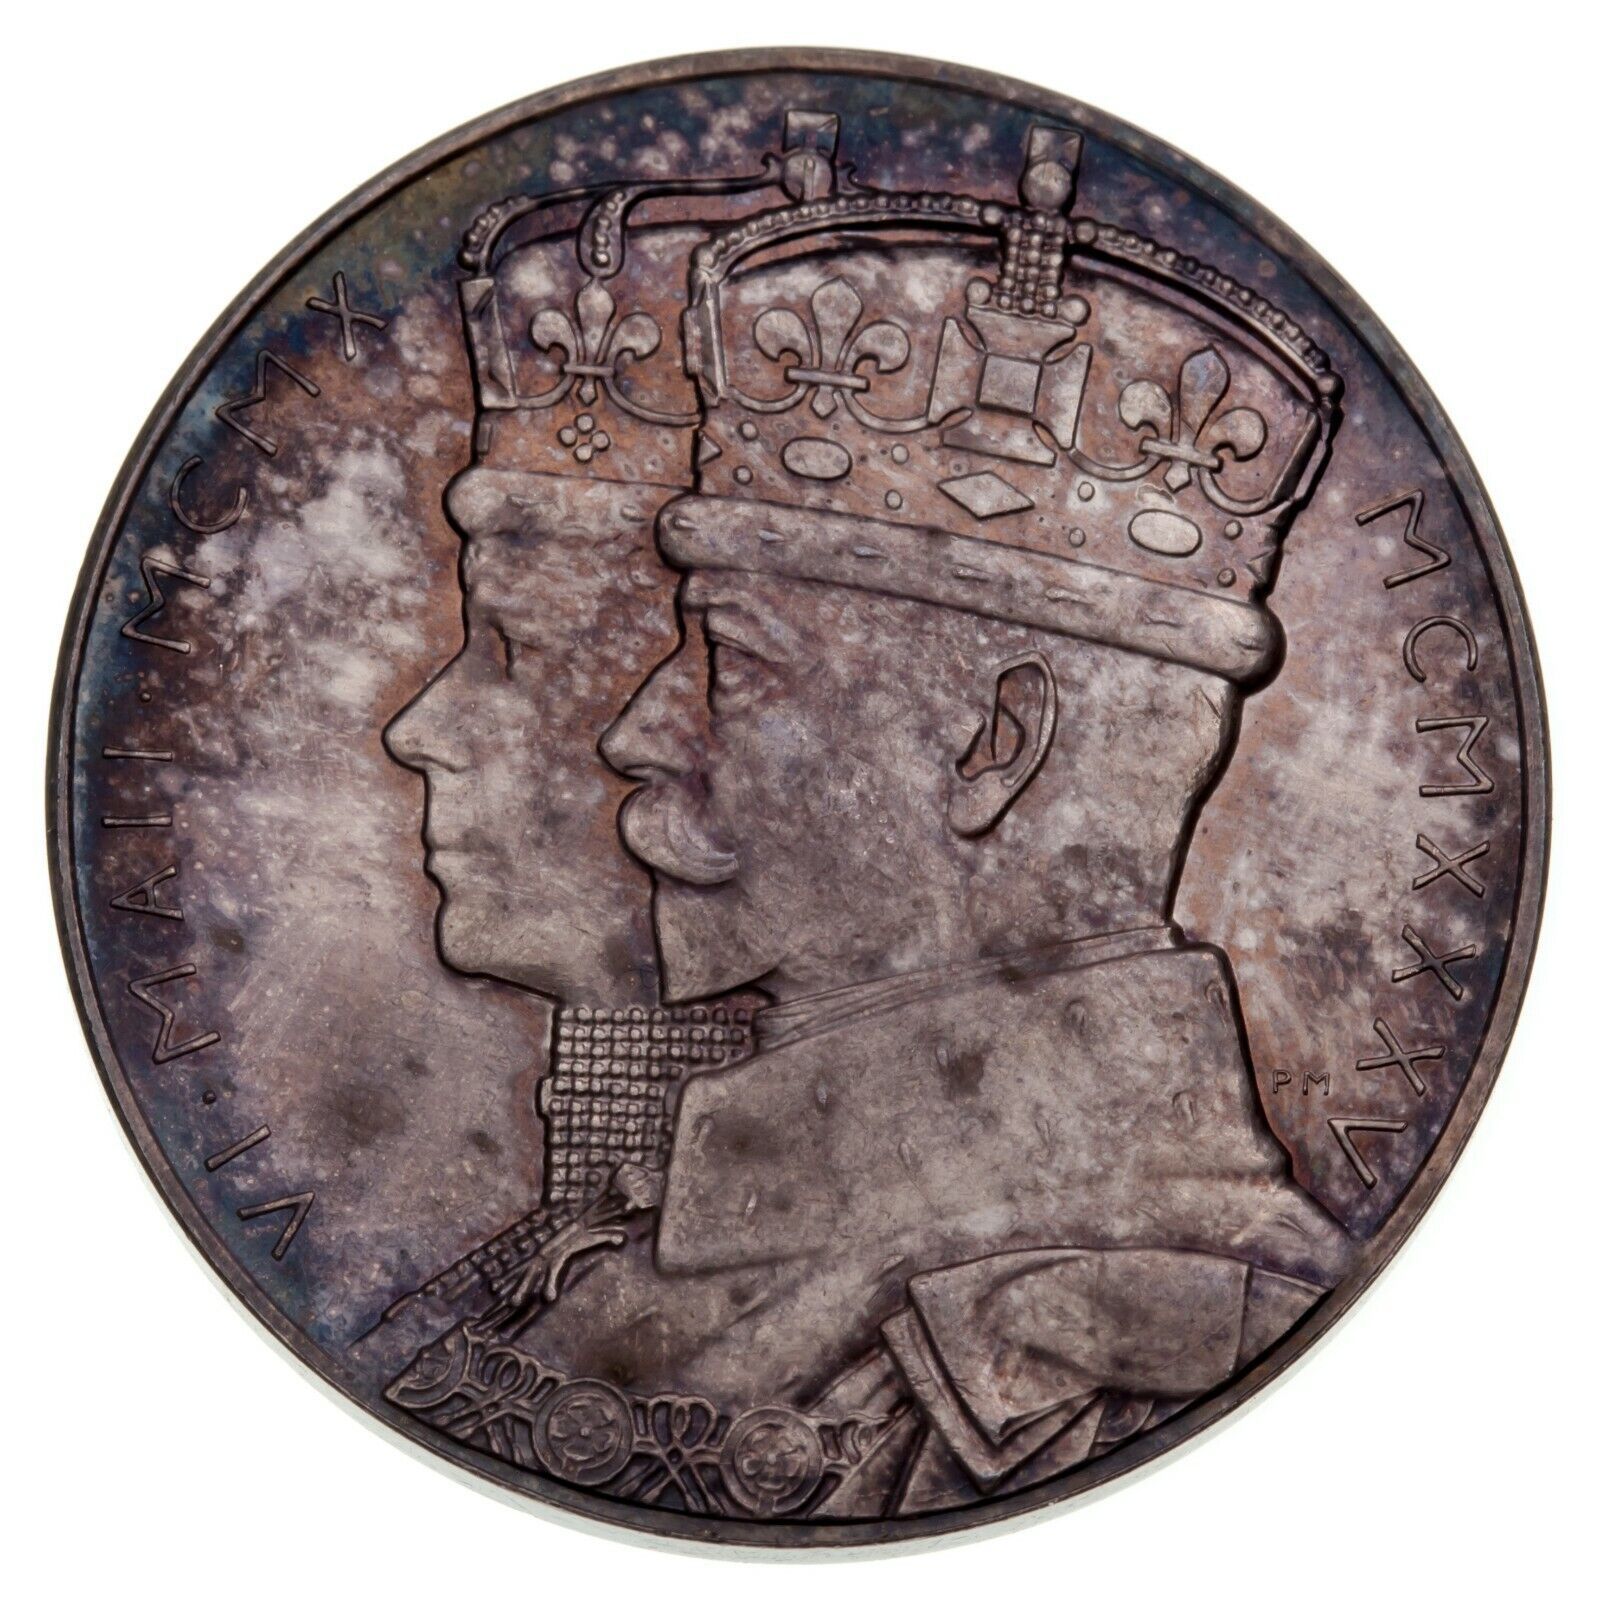 Primary image for 1935 Great Britain King George V Silver Jubilee Medal in Silver